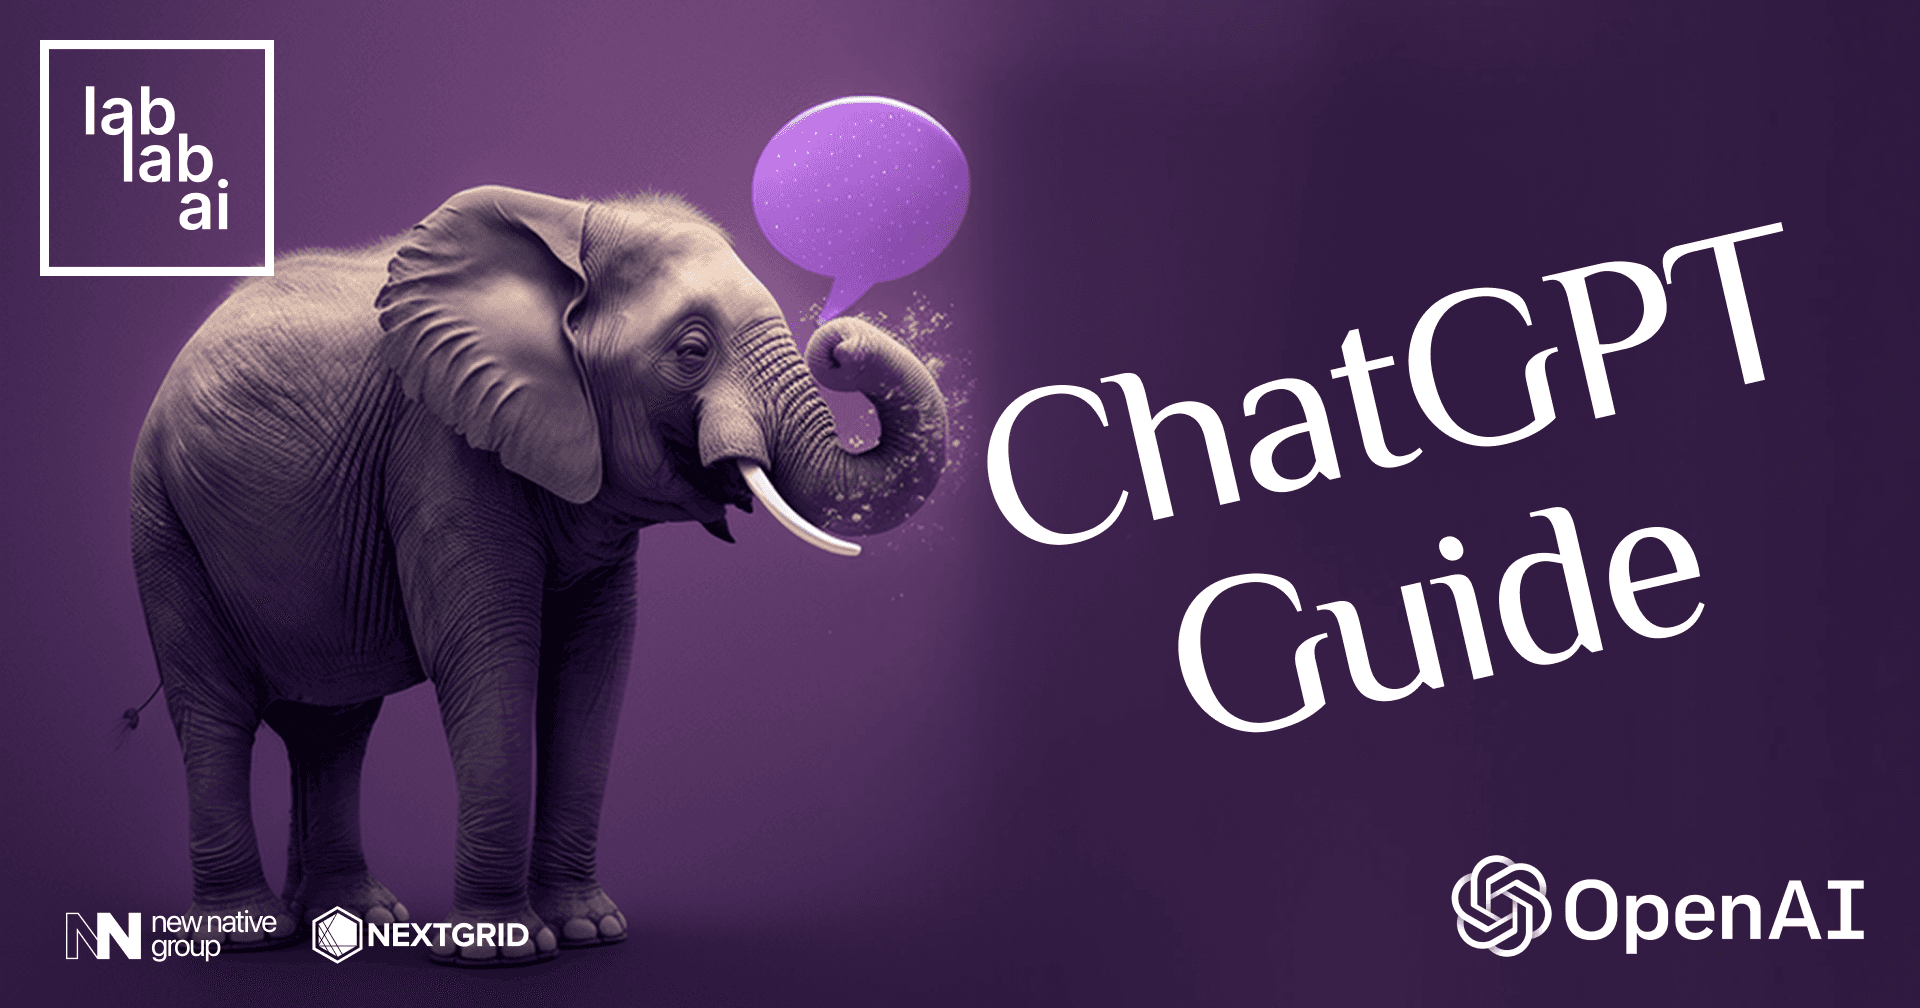 Need to speed up your coding? 🤔 ChatGPT is great, but it doesn't do  everything. Here are 8 awesome resources to help you get the web developer  job - Thread from Csaba